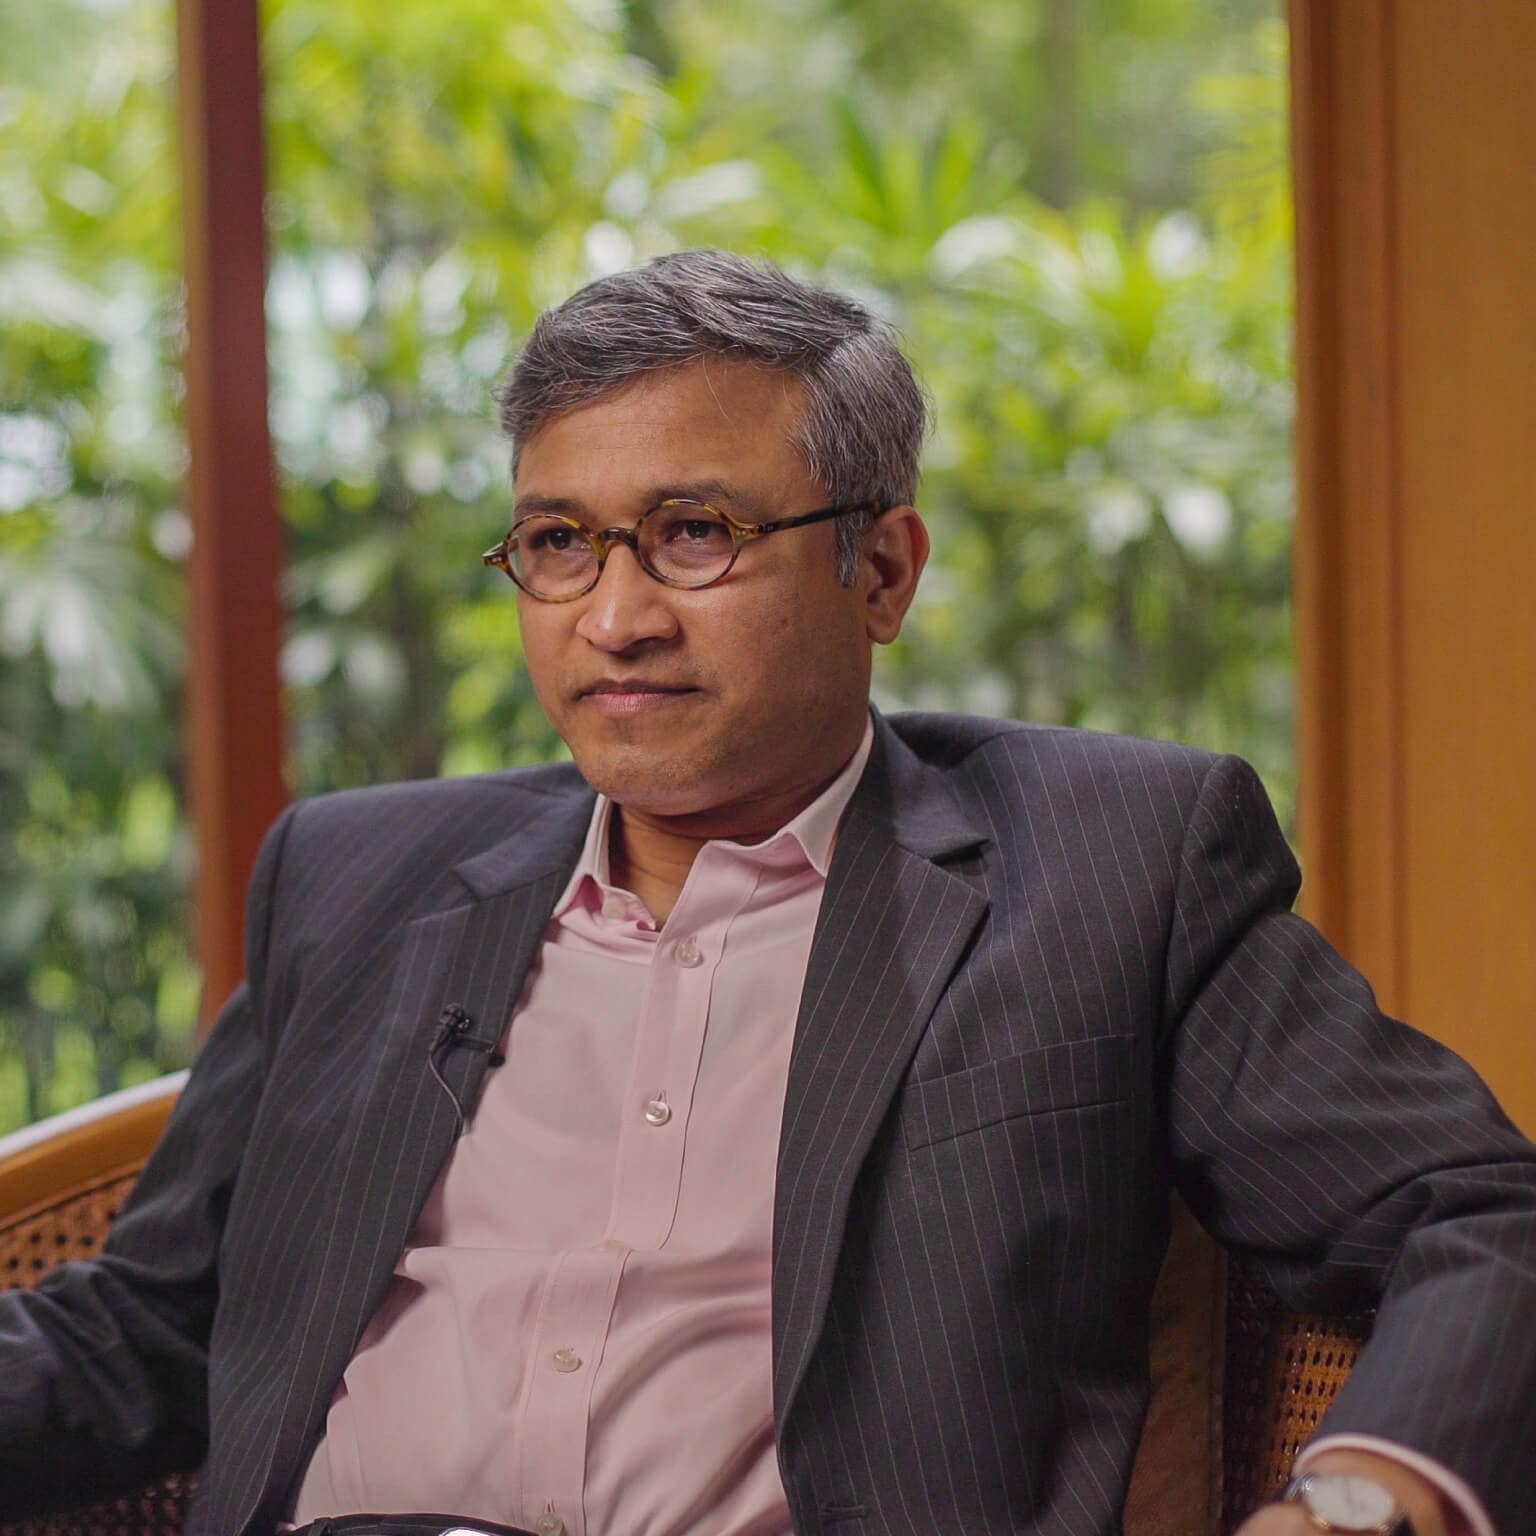 The Rajat Xxx Video - How can Asia embark on a sustainable growth path? | McKinsey